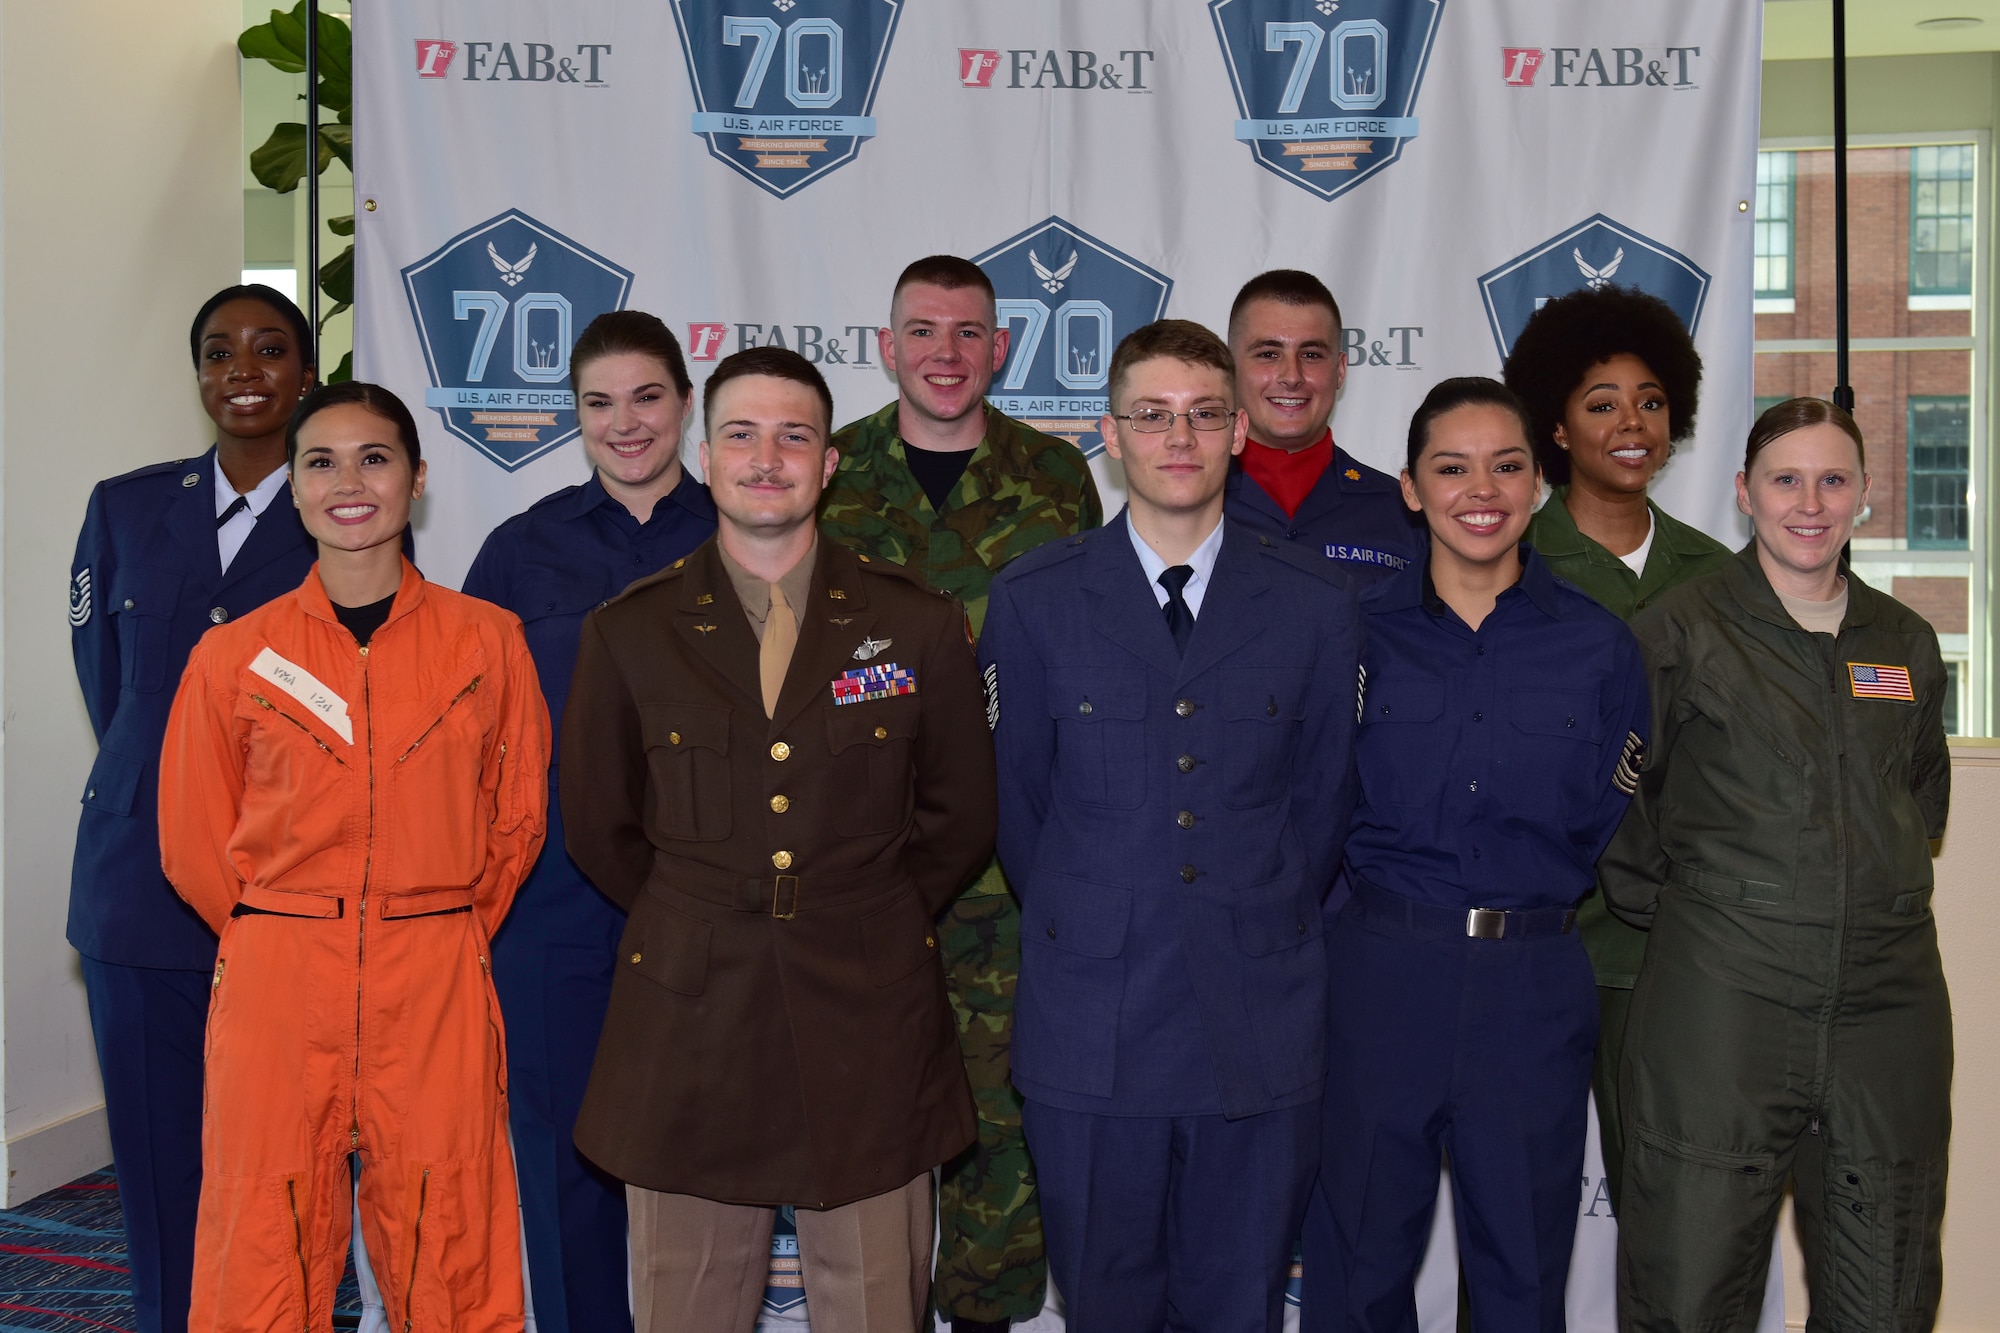 A group of people stand in front of a background wearing different historic U.S. Air Force uniforms.